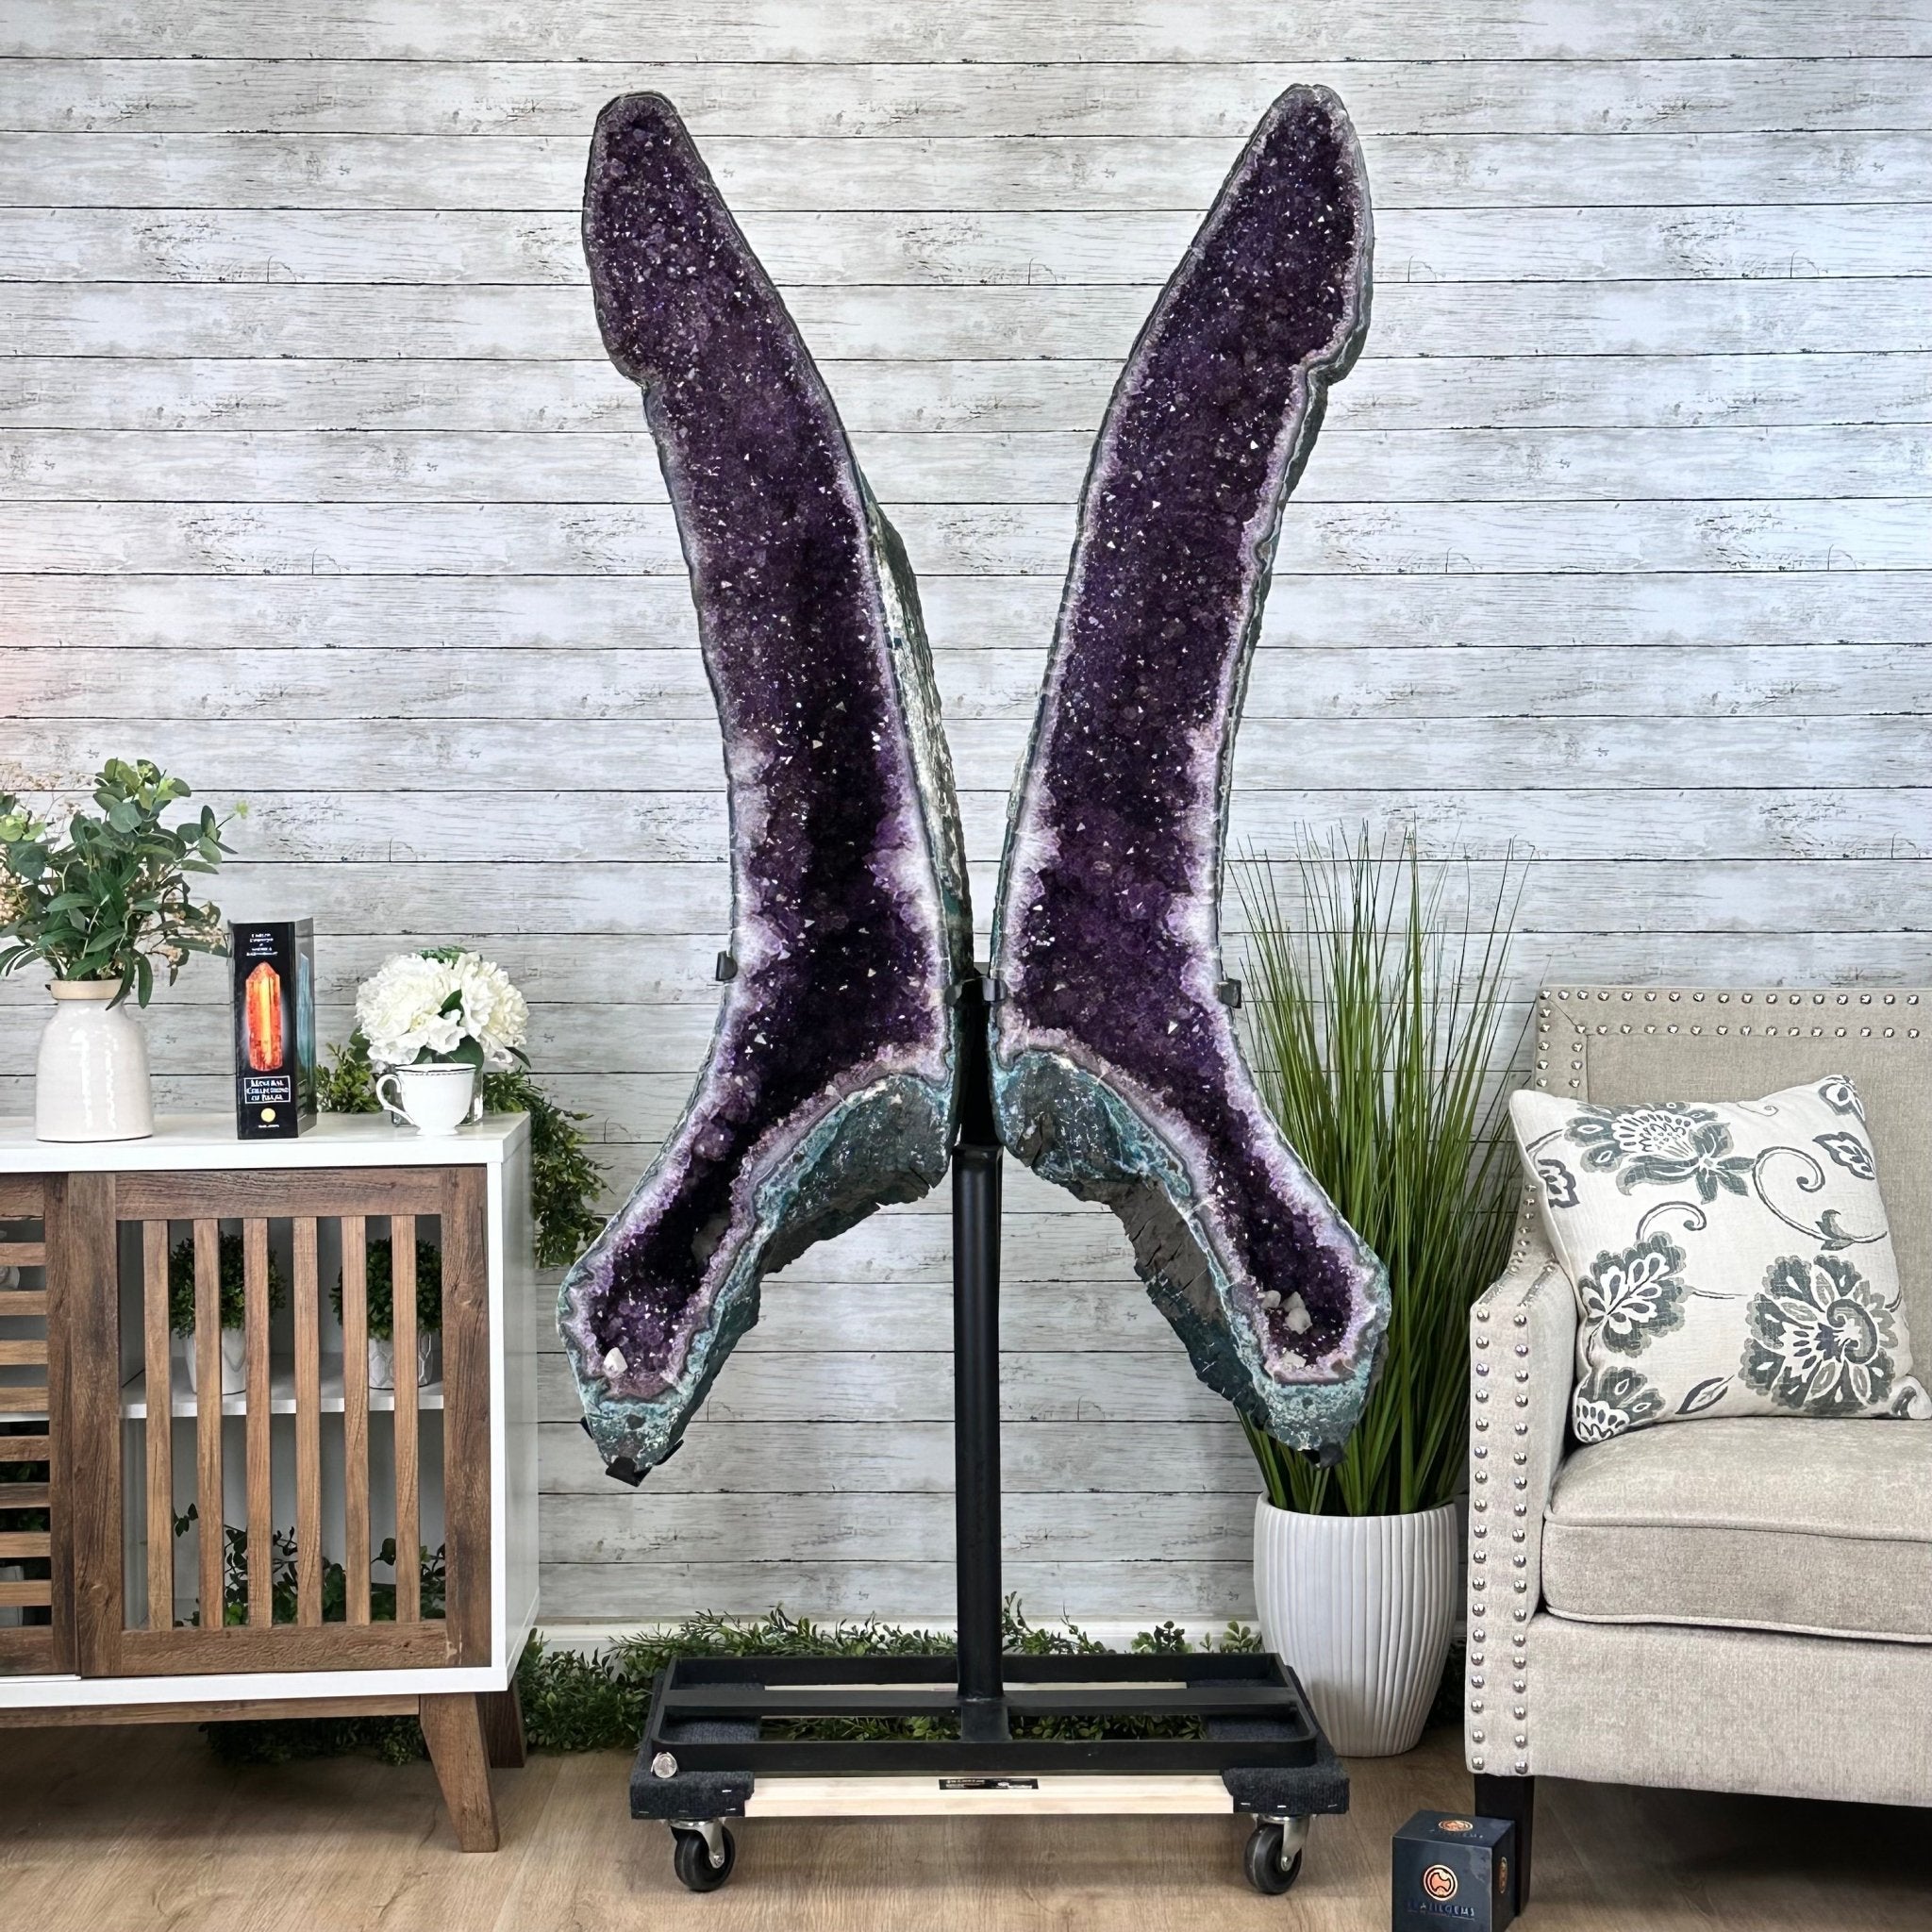 Extra Plus Quality Amethyst Butterfly Wings 311 lbs & 72" Tall #5493-0045 - Brazil GemsBrazil GemsExtra Plus Quality Amethyst Butterfly Wings 311 lbs & 72" Tall #5493-0045Amethyst Butterfly Wings5493-0045